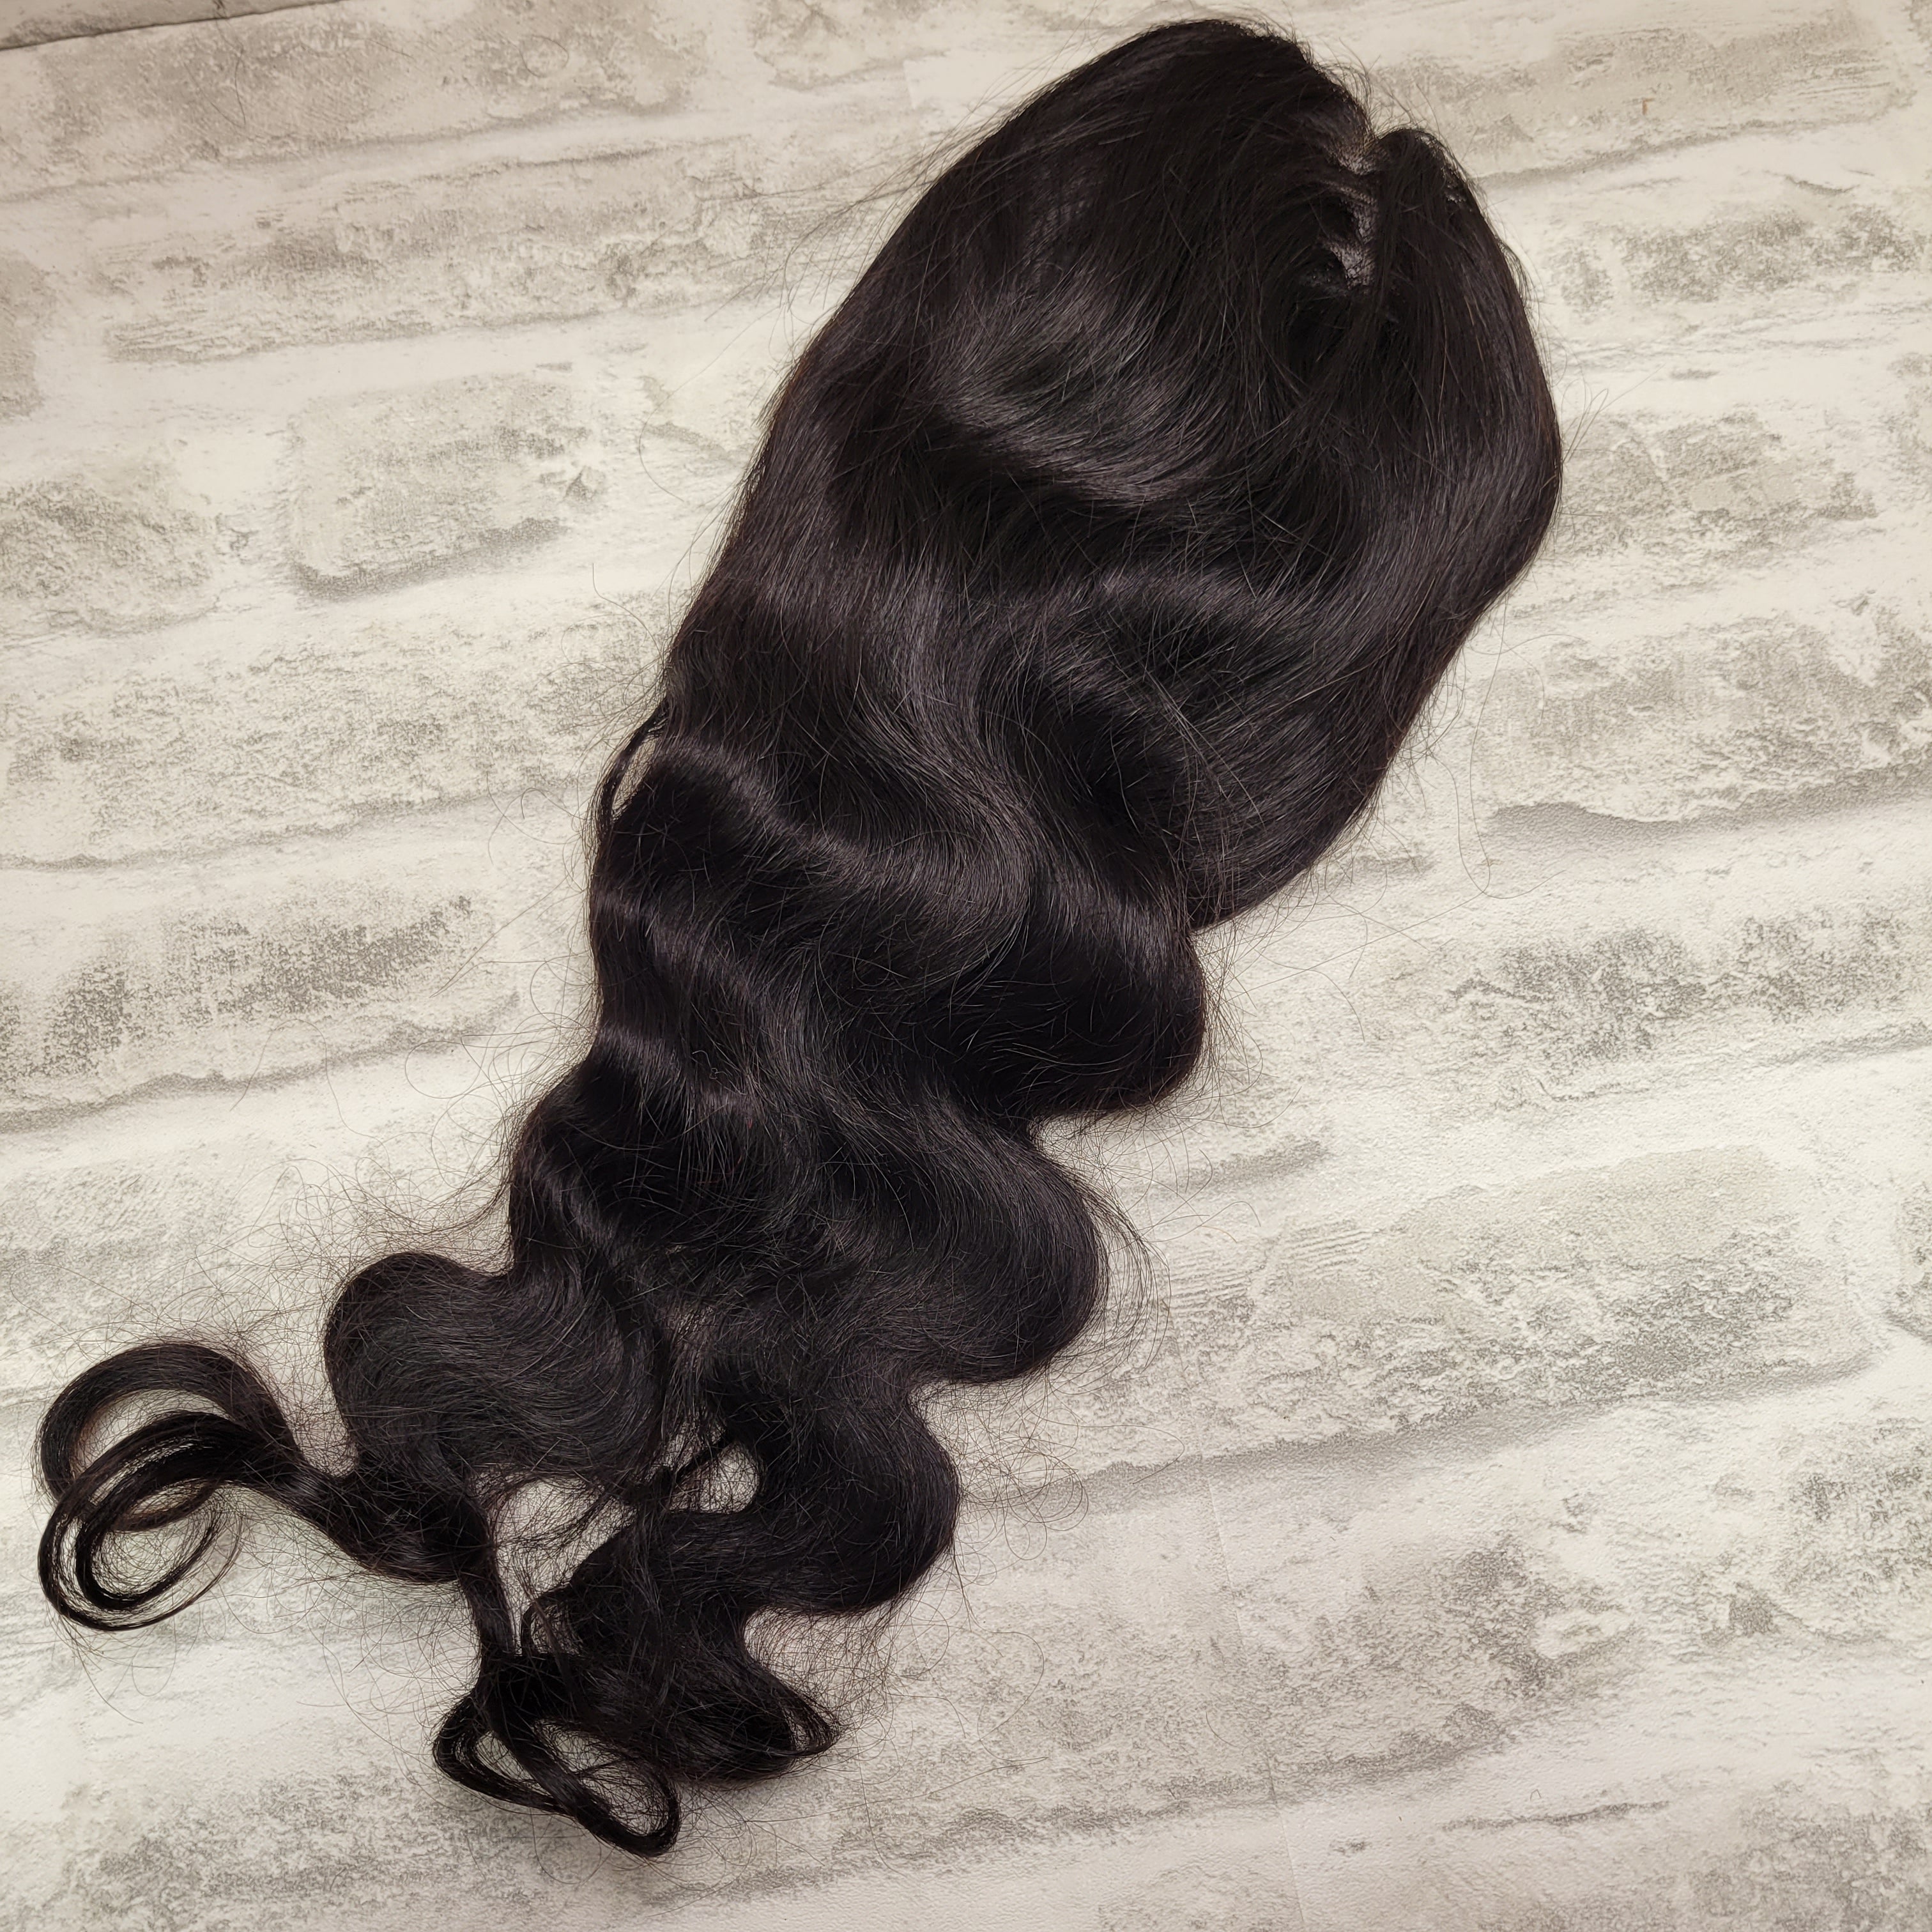 Human Hair Lace Front Wig Remy Human Hair, Body Wave, Dark Brown, 20